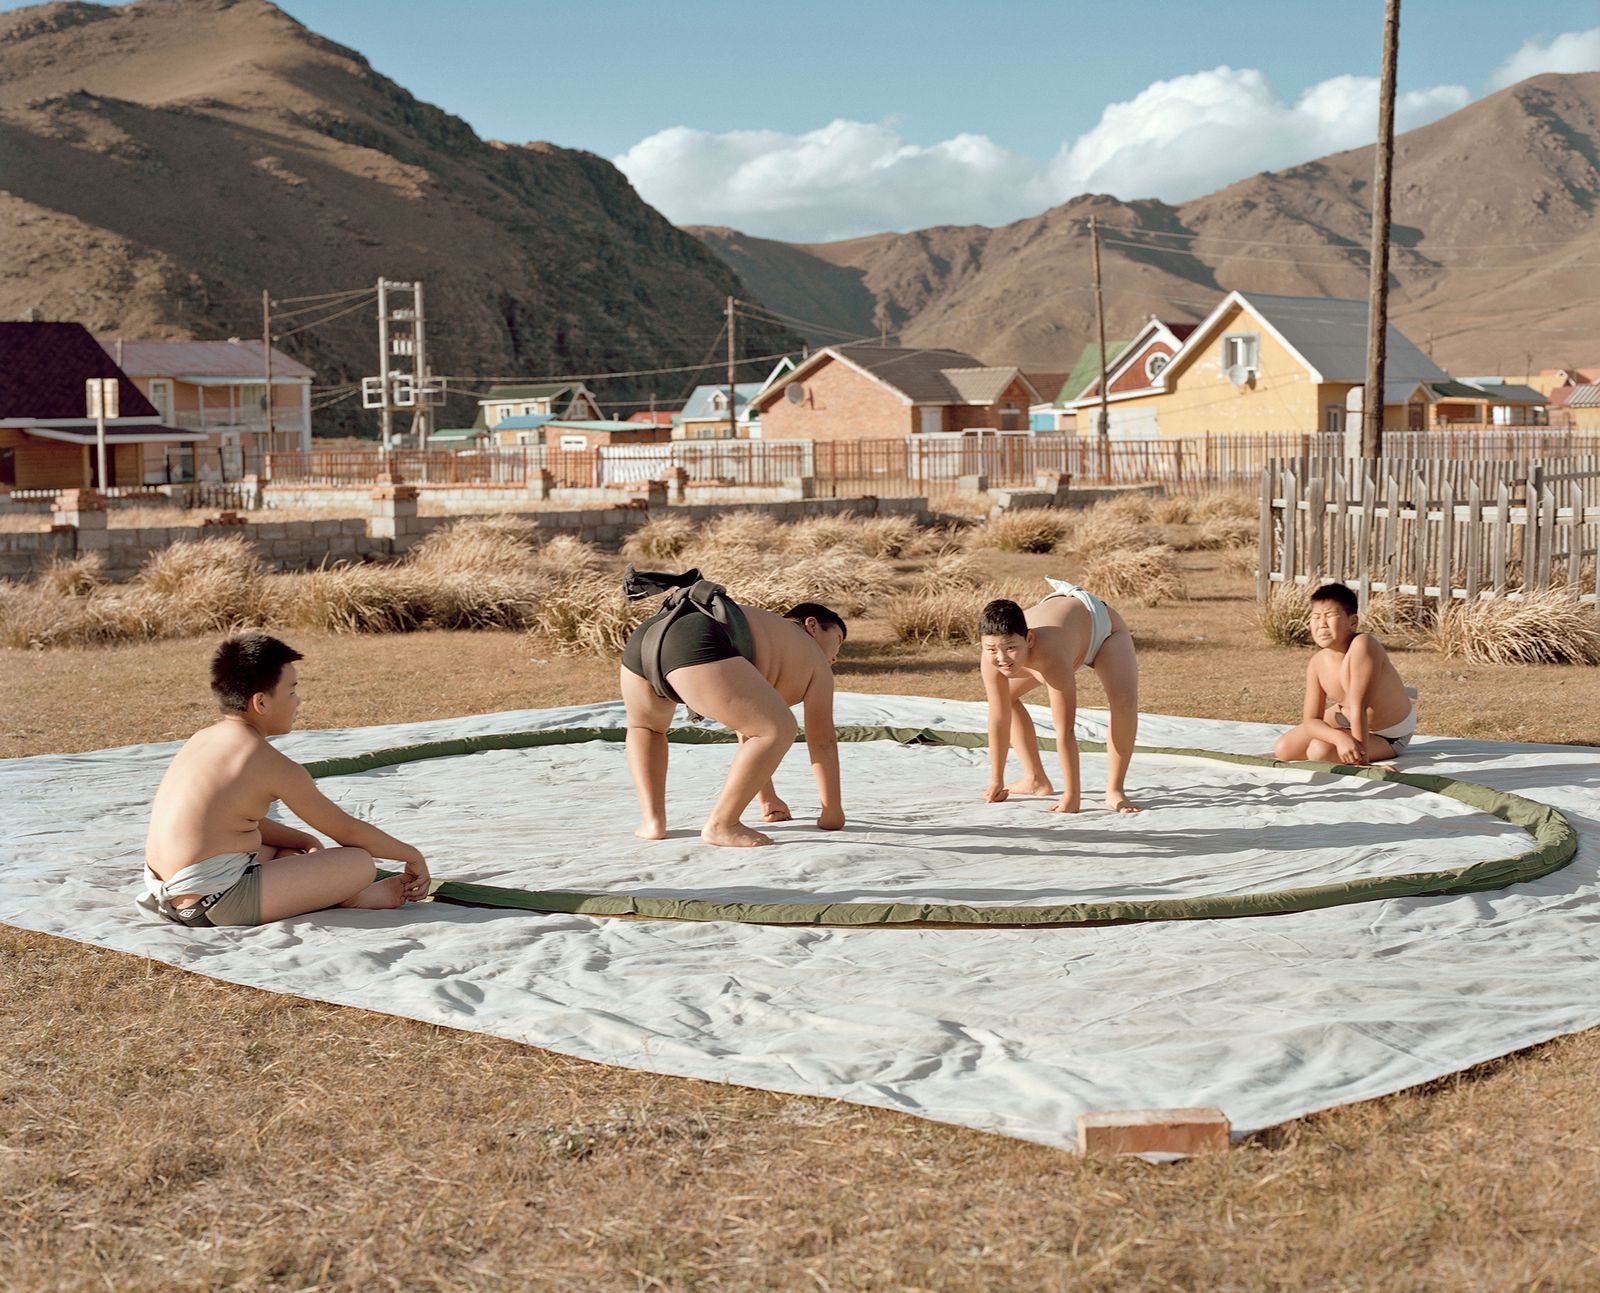 © Catherine Hyland - Image from the Rise of the Mongolians photography project